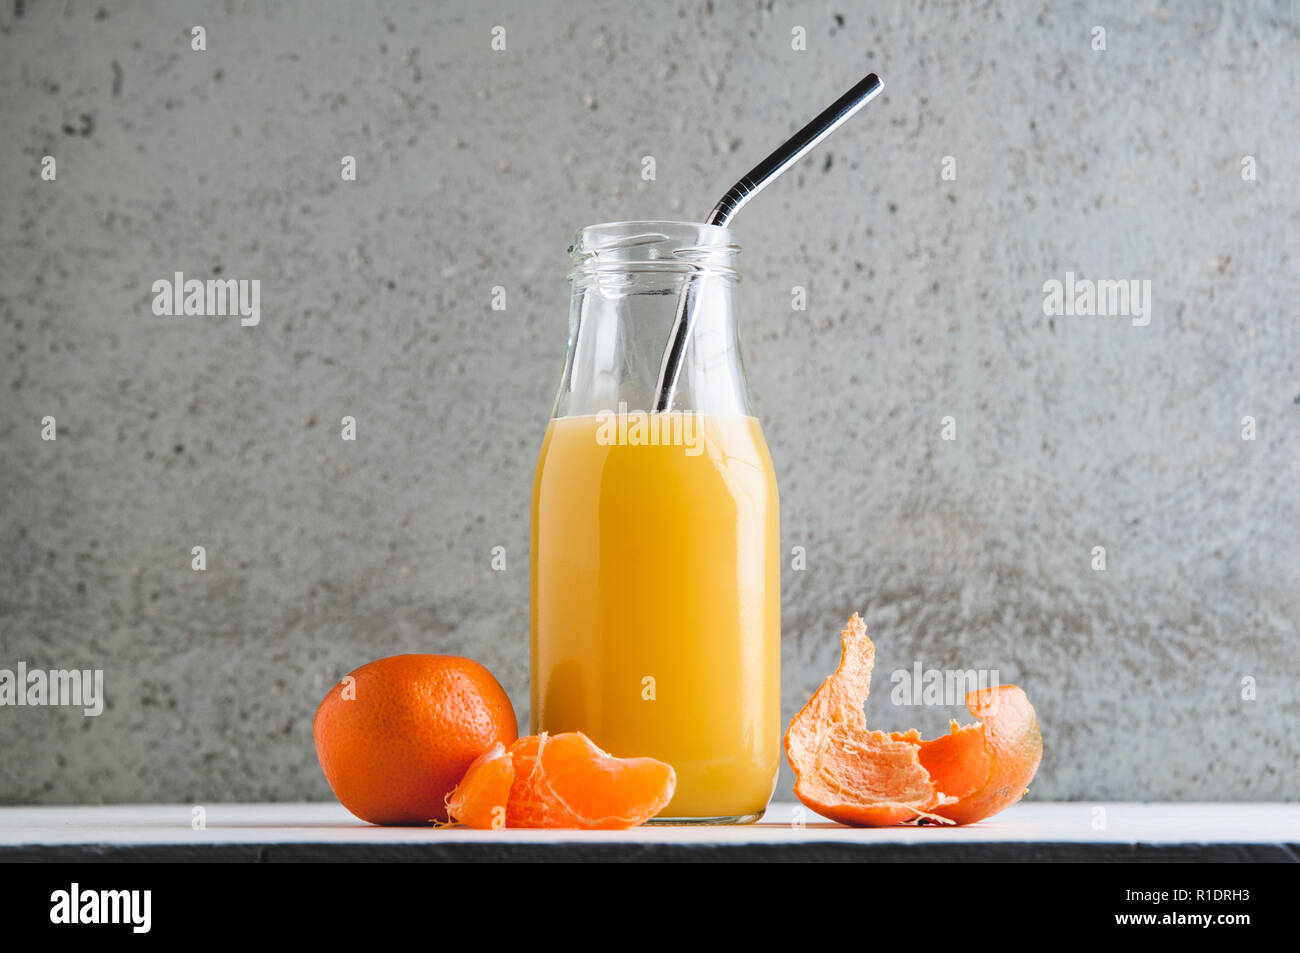 orange juice in a bottle with a reusable metal straw Stock Photo